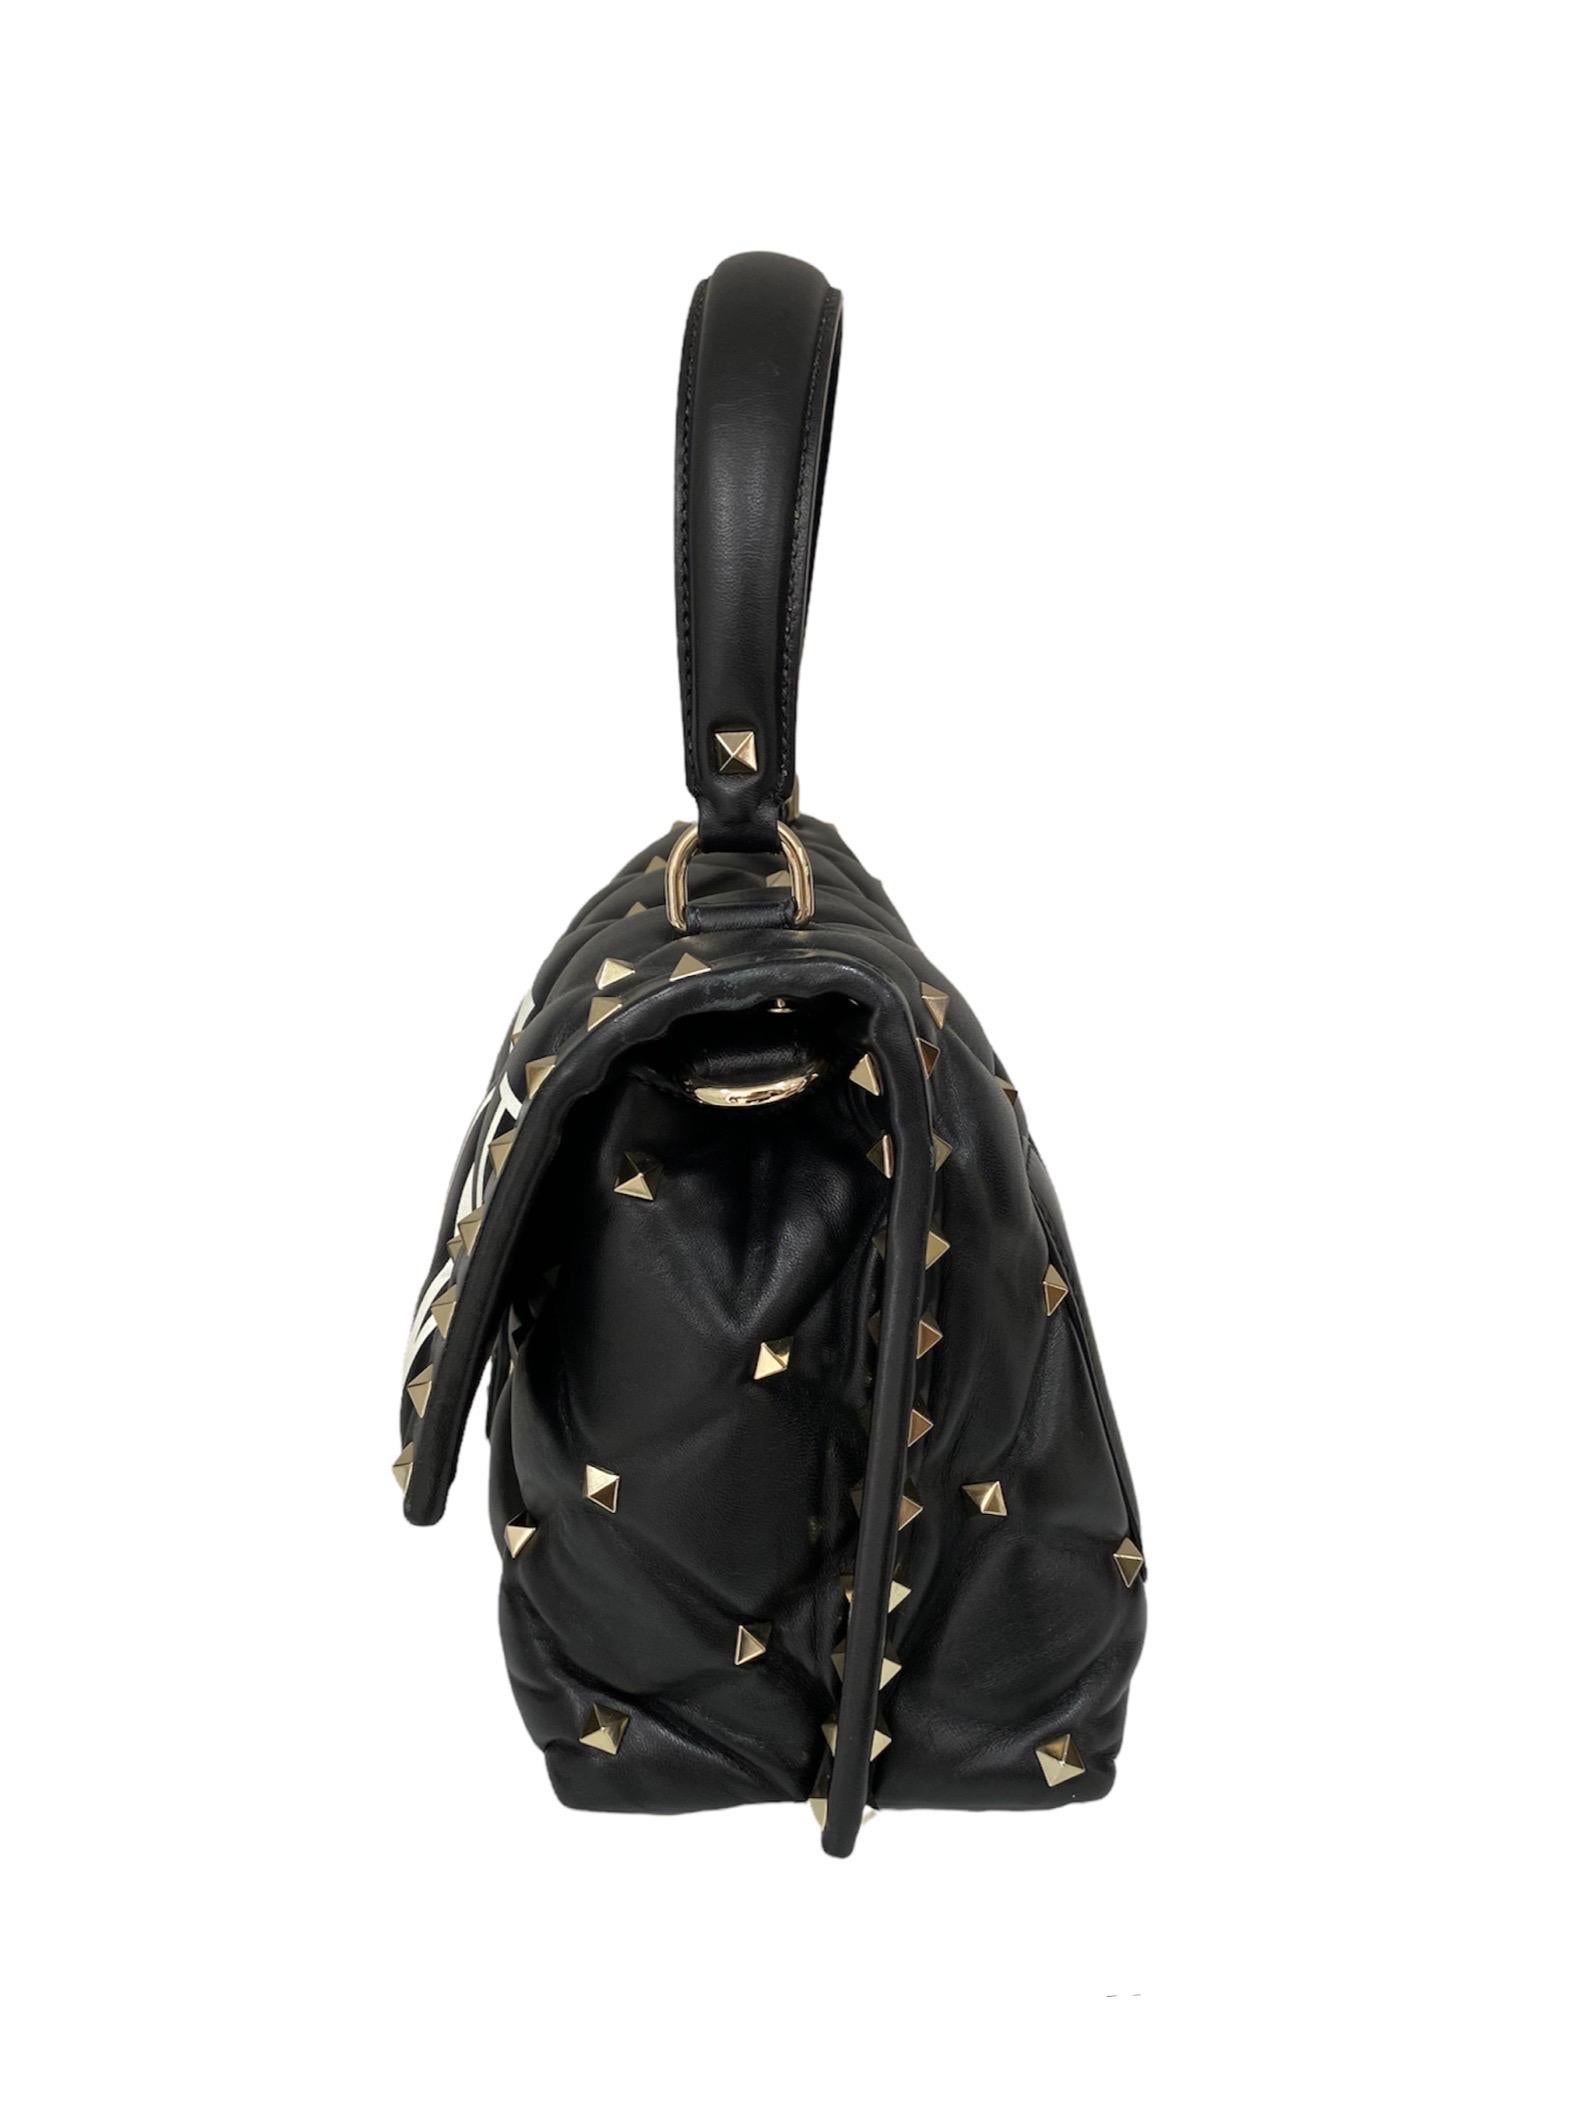 Valentino bag, Candystud model, made of black quilted leather with white VLTN front writing and golden hardware.

Equipped with a flap with interlocking closure, internally lined in black fabric, quite roomy.

Equipped with a rigid central handle